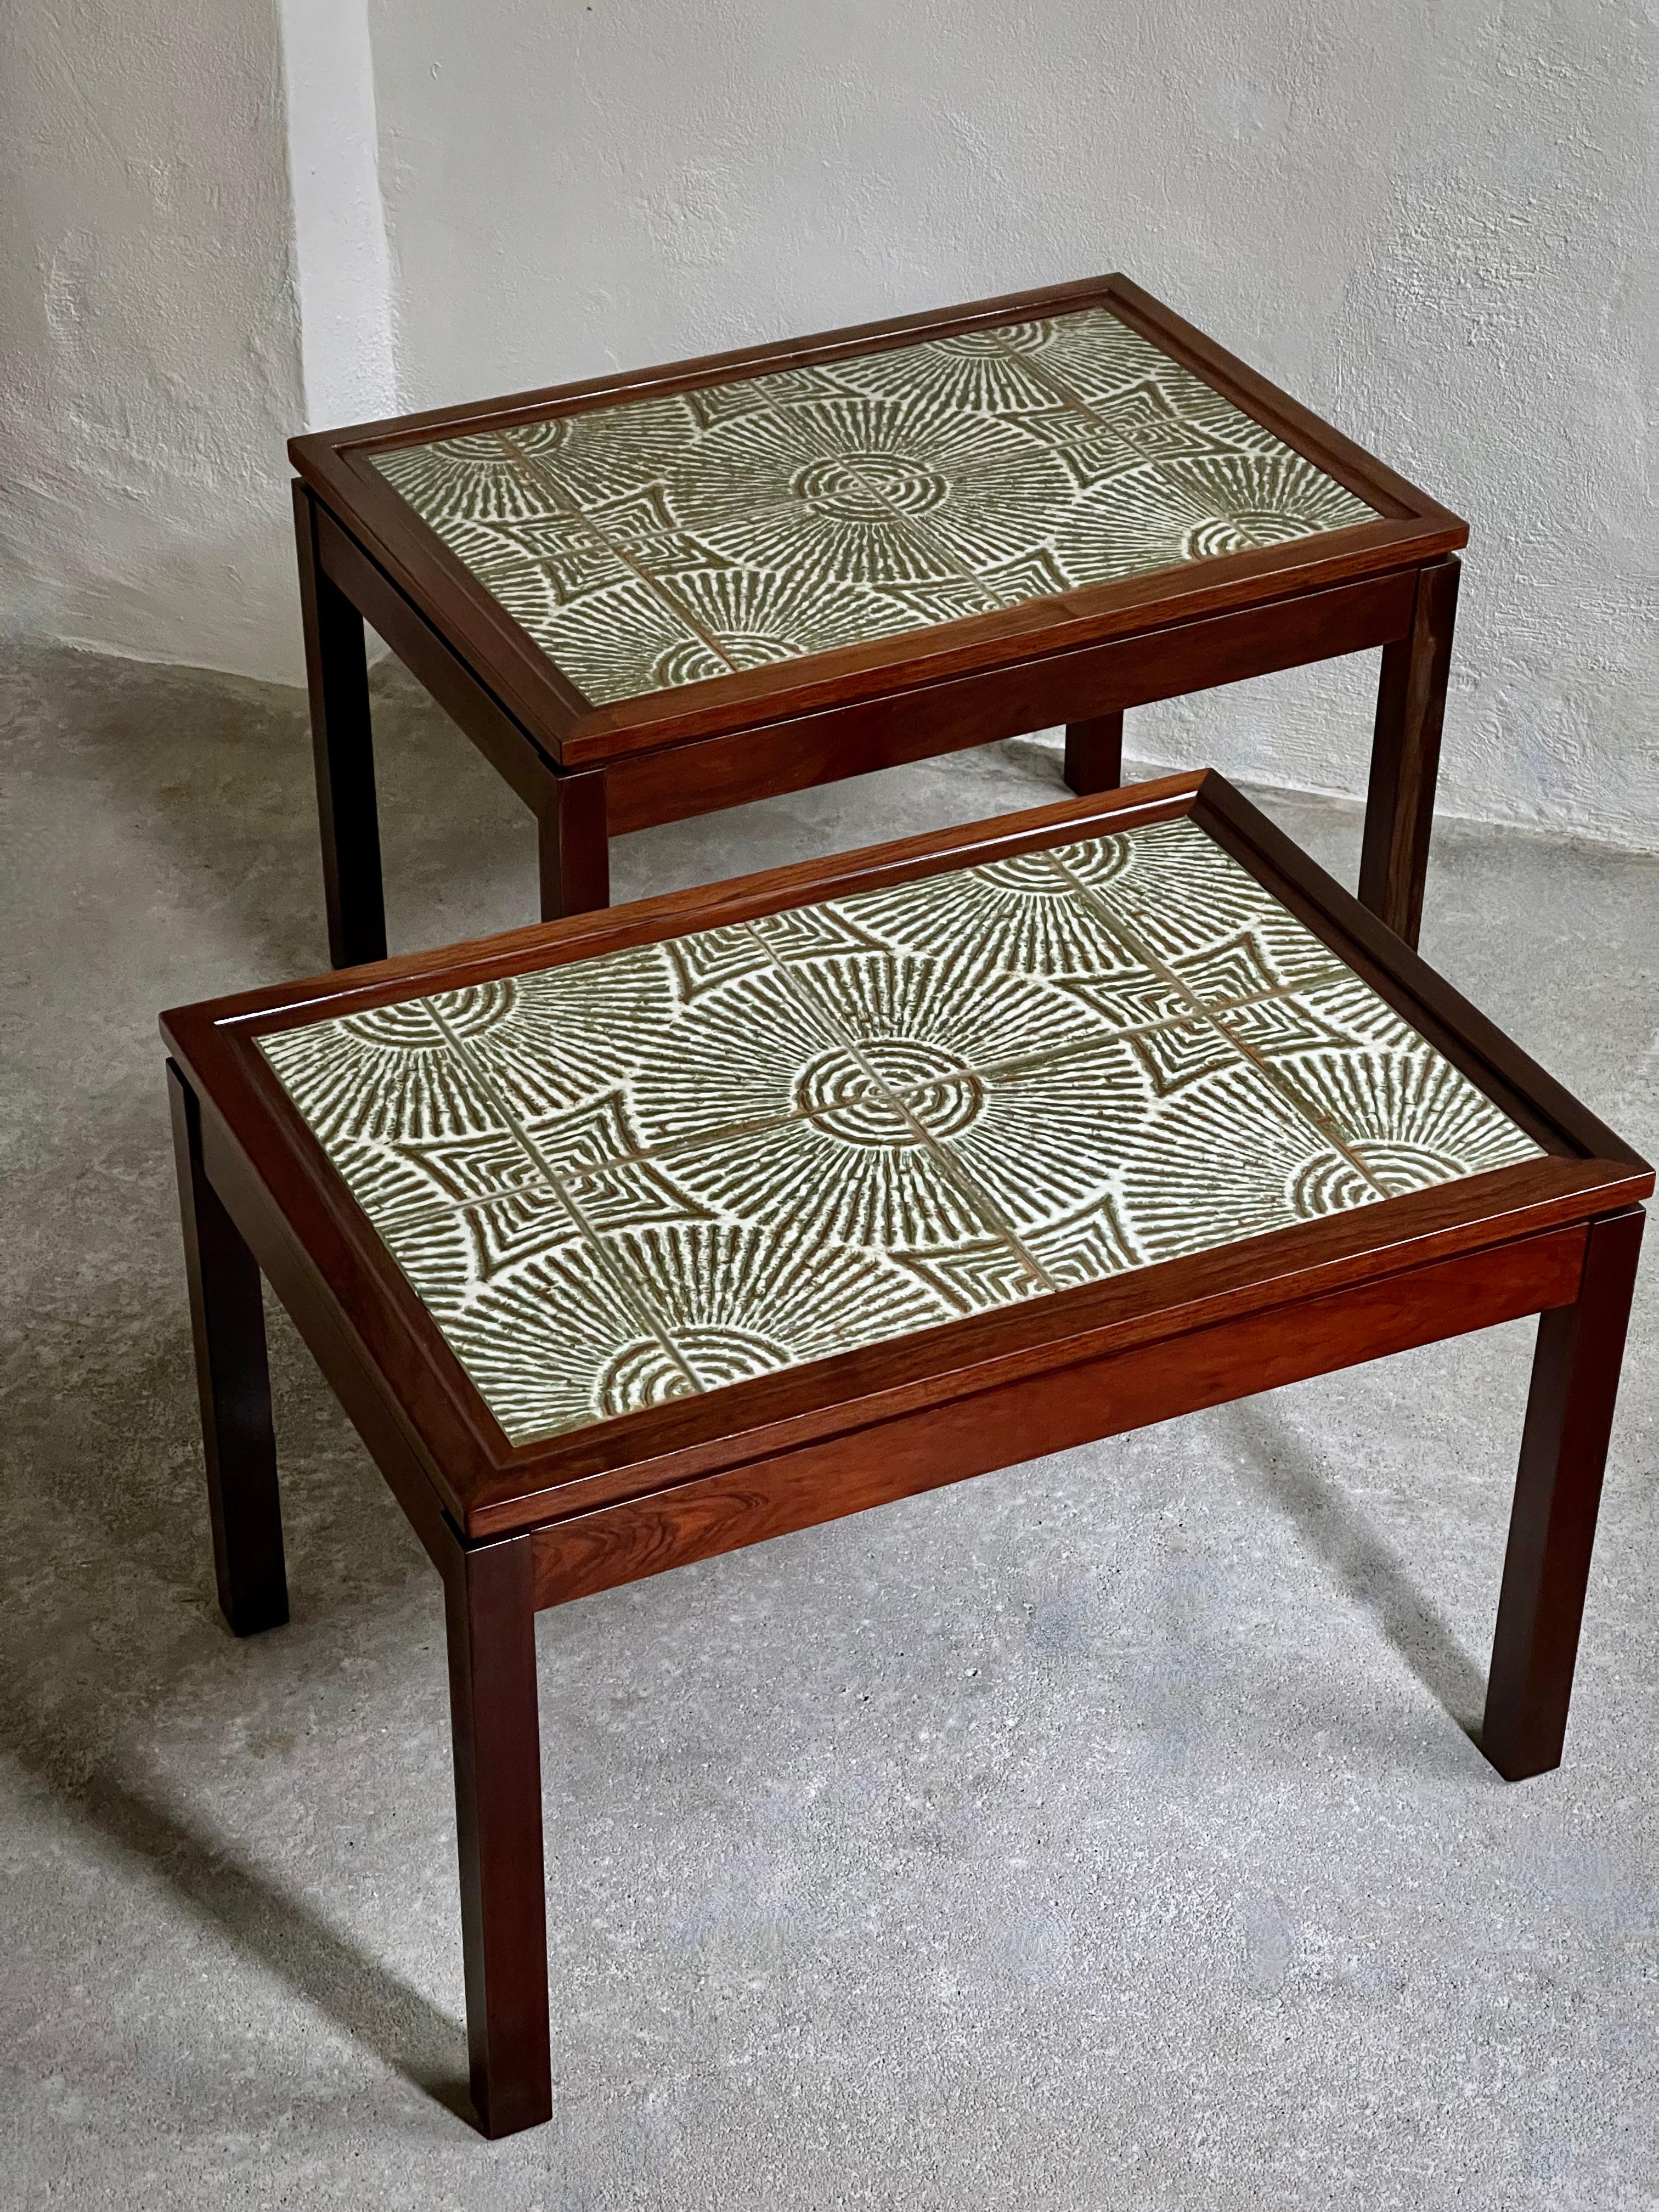 Pair of 1960s Danish Side Tables with ceramic tile table top by Edmund Jørgensen For Sale 1